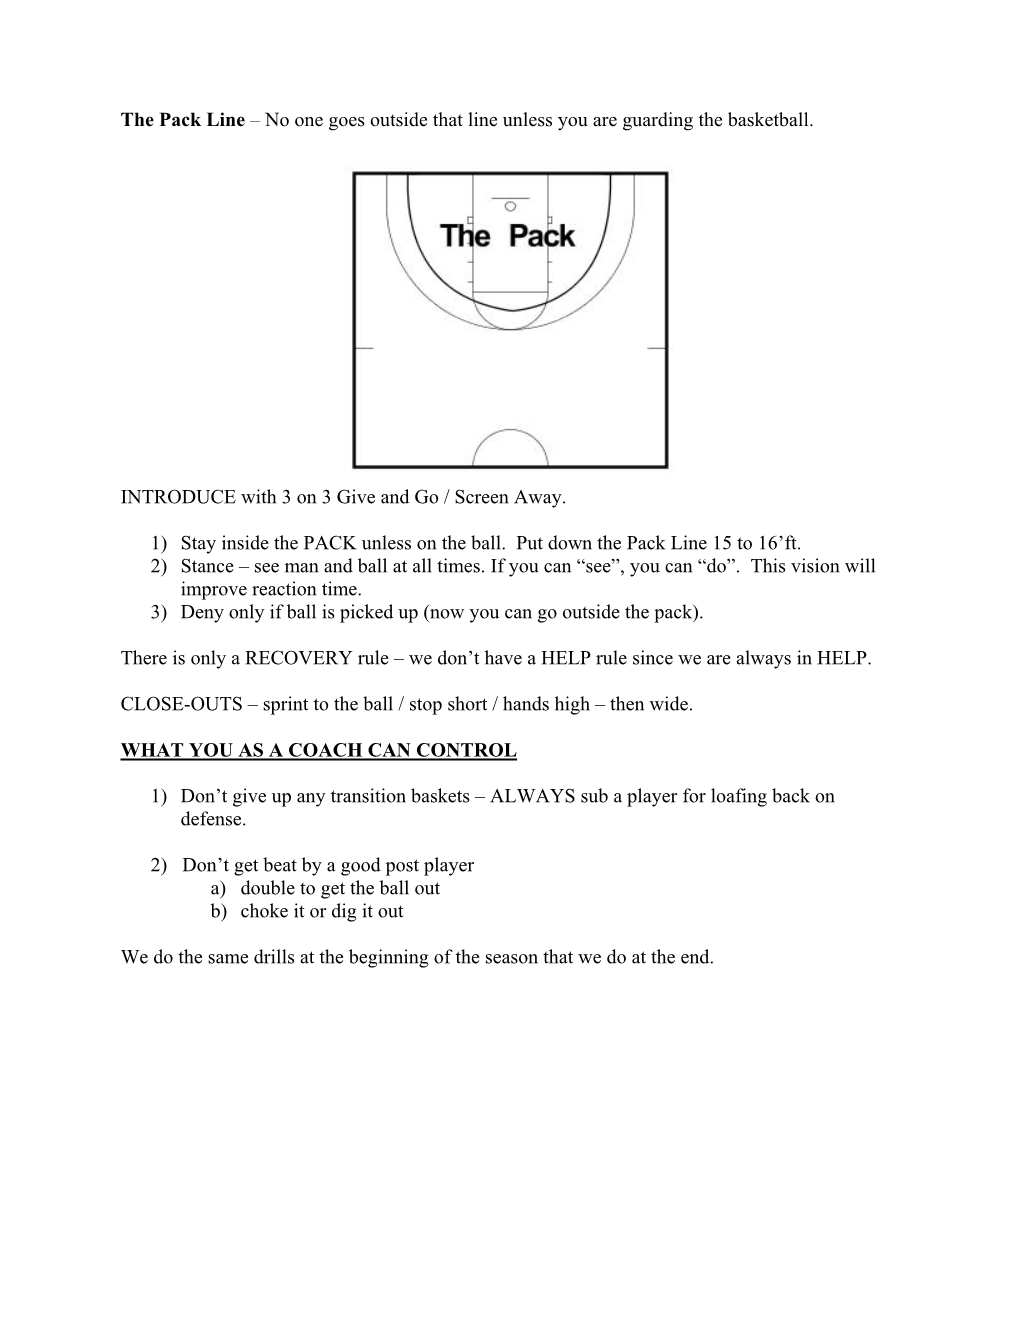 The Pack Line – No One Goes Outside That Line Unless You Are Guarding the Basketball